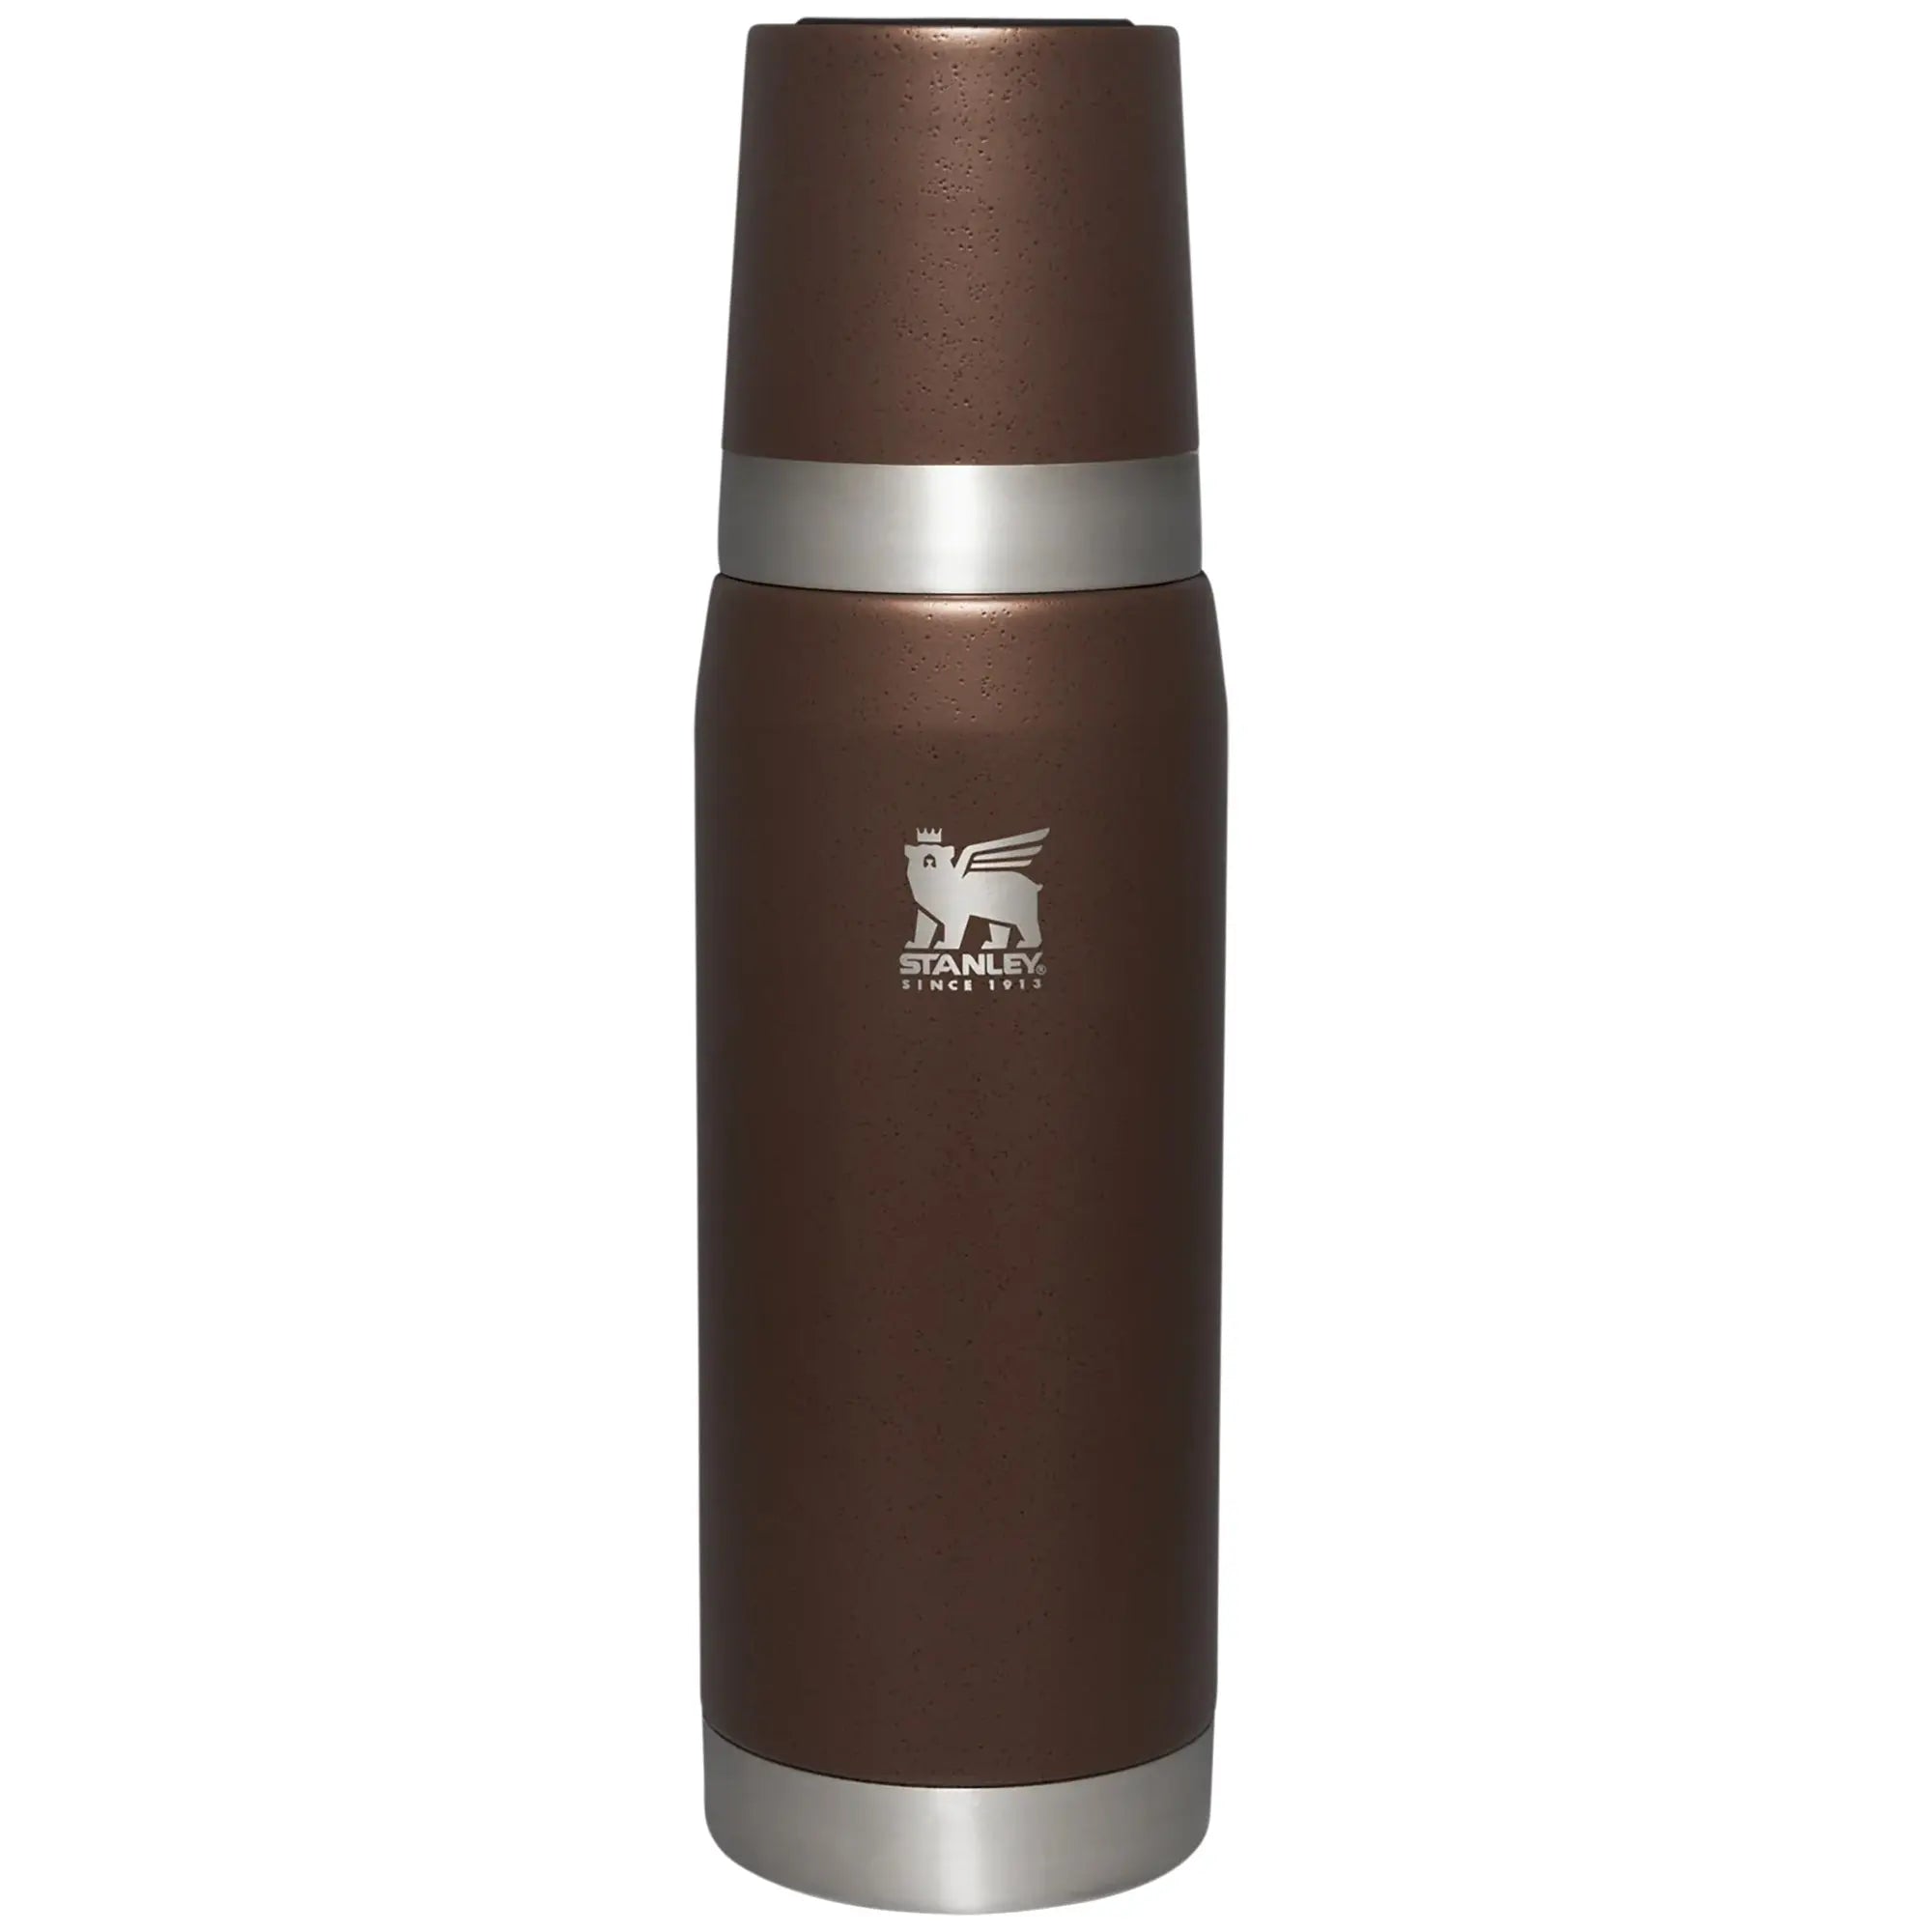 Stanley 25 oz. Foundry Series Forge Thermal Bottle - Bronze Moon Stanley